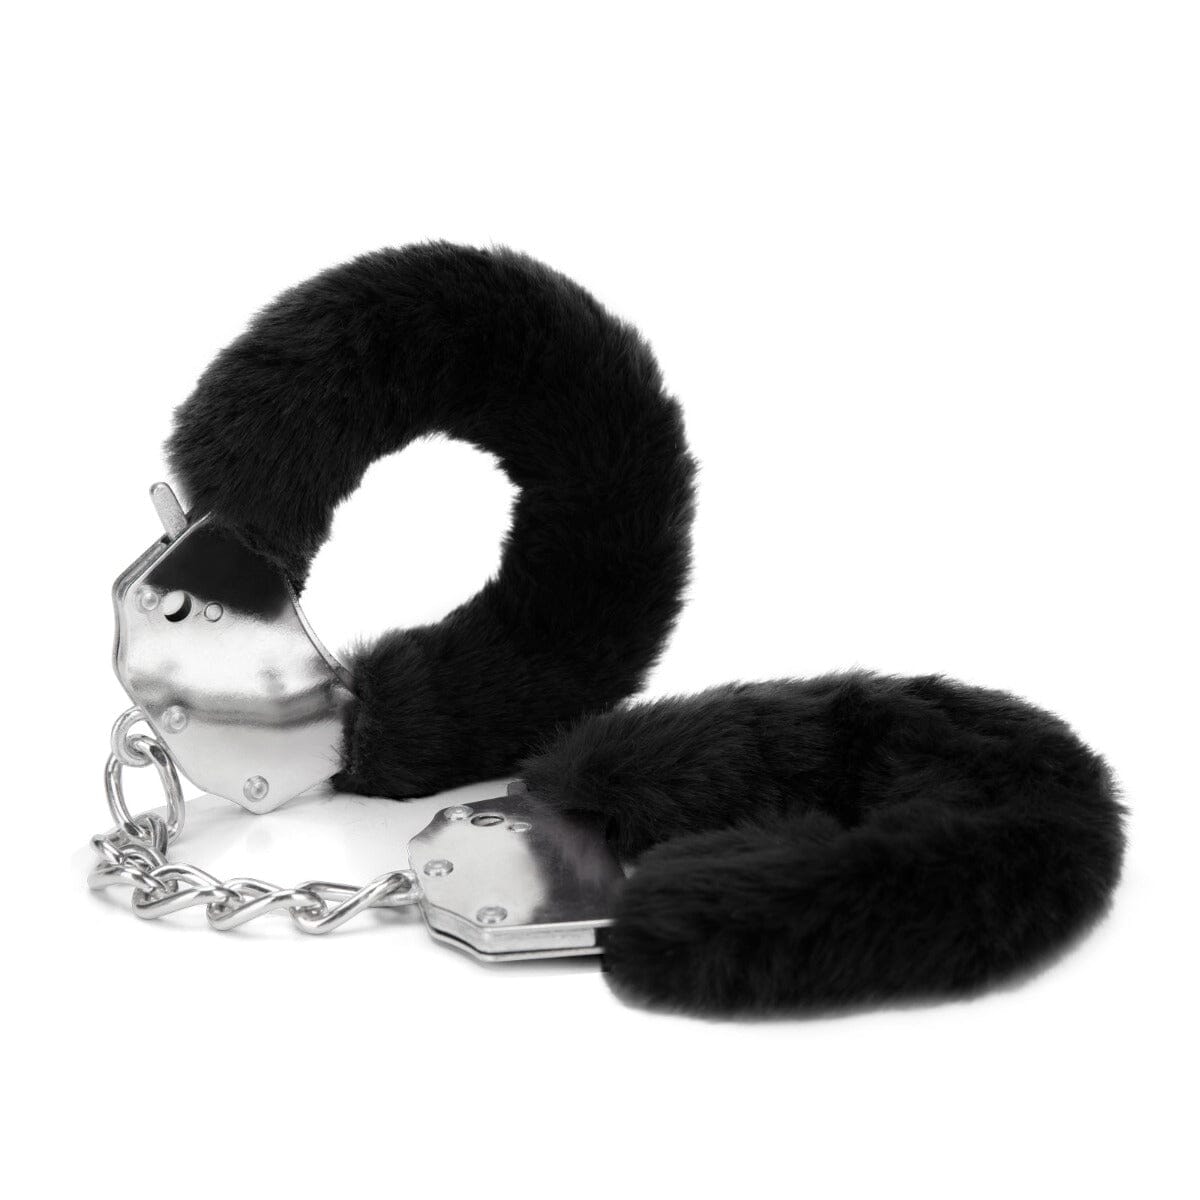 a pair of handcuffs with chains attached to them